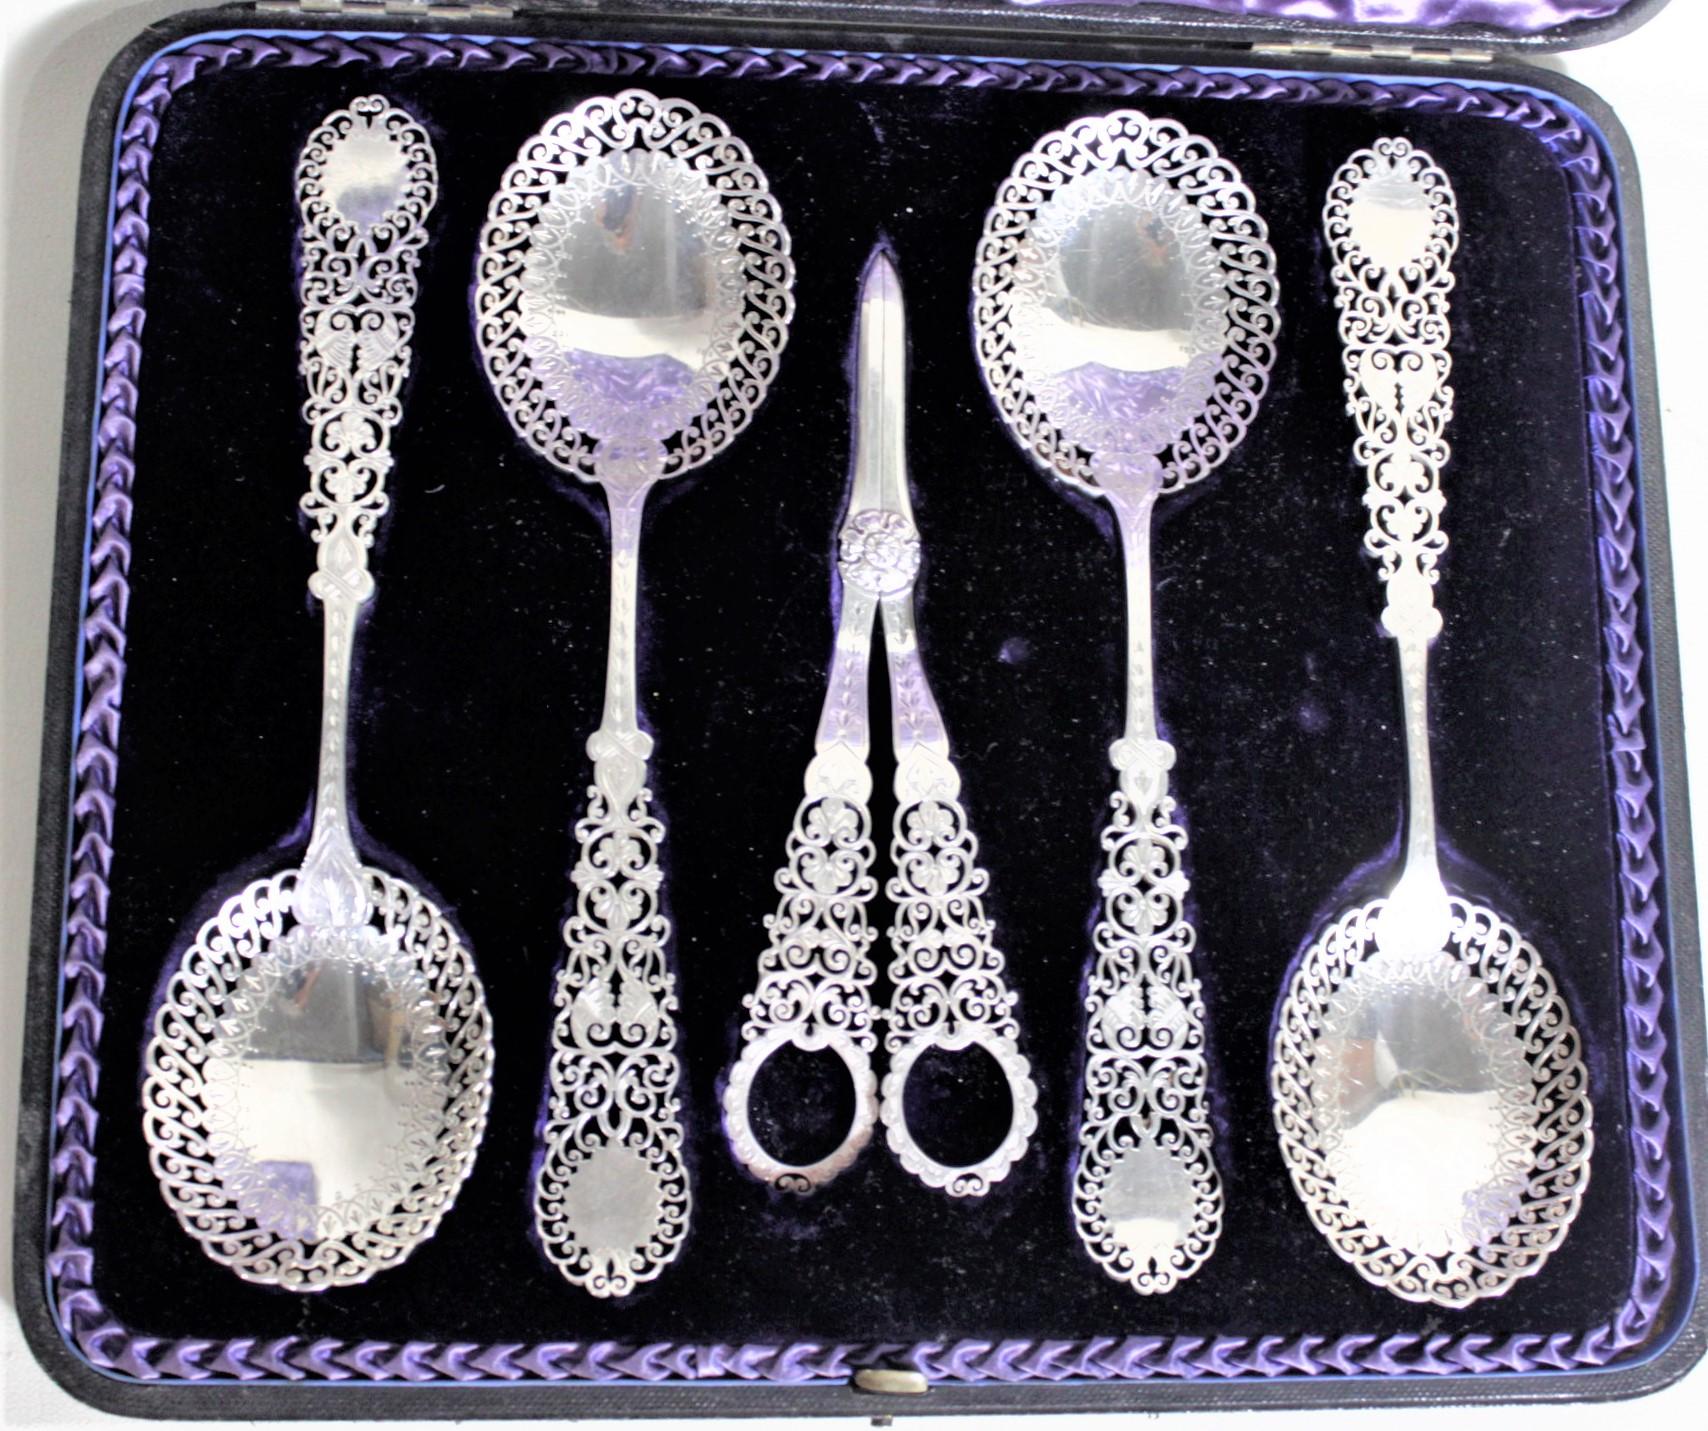 This antique sterling silver berry set was made in London England in circa 1880 in the period Victorian style. The set is composed of four large matching berry spoons and a pair of grape shears in a velvet lined fitted leather case. These sterling